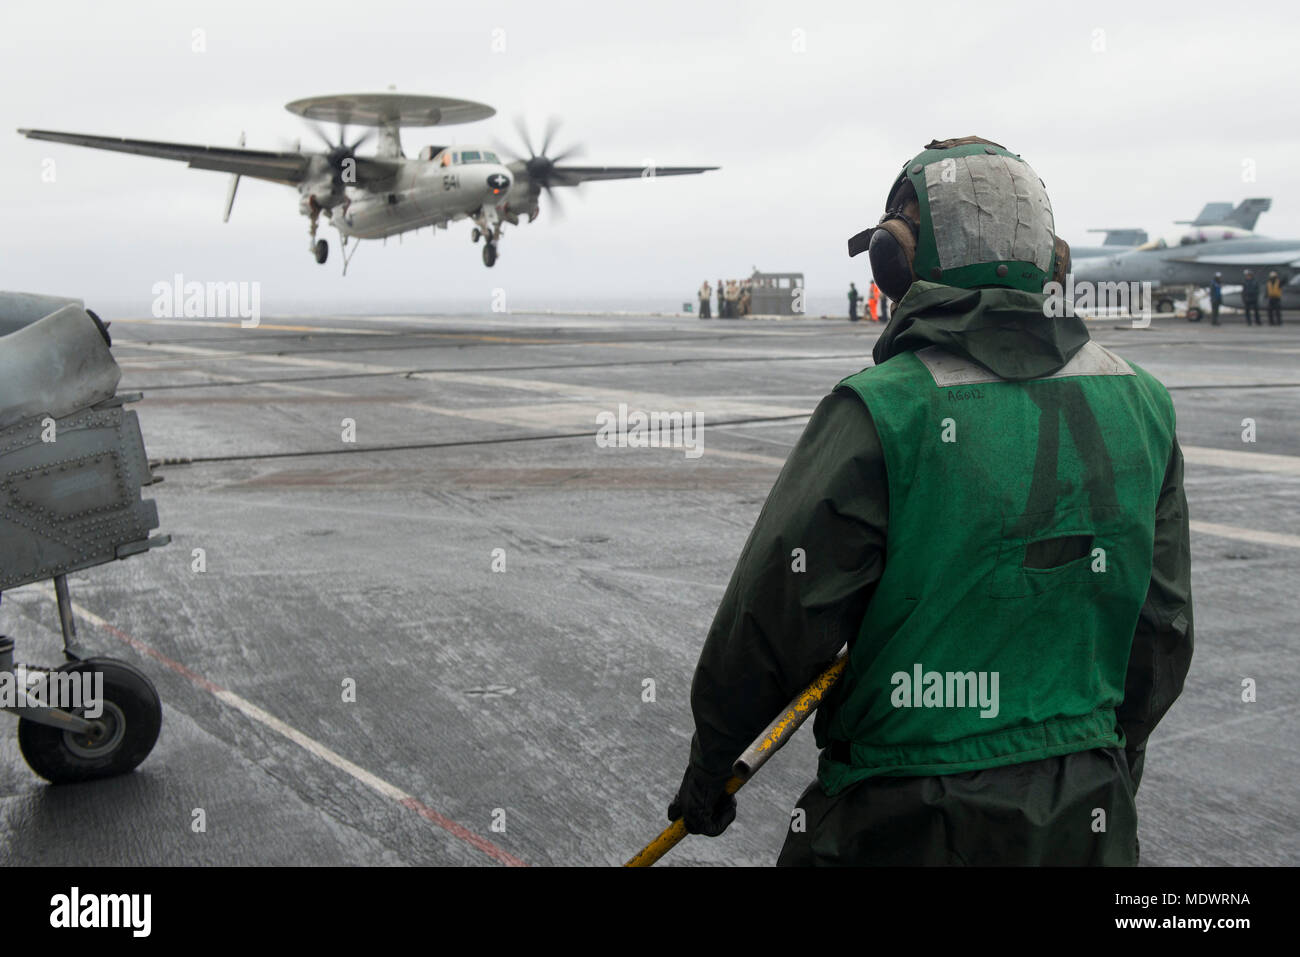 171208-N-PE636-079 ATLANTIC OCEAN (Dec. 8, 2017) Aviation Boatswain's Mate (Equipment) Airman Brandon Chapman watches an E-2C Hawkeye, assigned to the 'Greyhawks' of Carrier Airborne Early Warning Squadron (VAW) 120, prepare to land on the flight deck aboard USS Harry S. Truman (CVN 75). Truman is currently underway conducting carrier qualifications in preparation for future operations. (U.S. Navy photo by Mass Communication Specialist 2nd Class Anthony Flynn/Released) Stock Photo